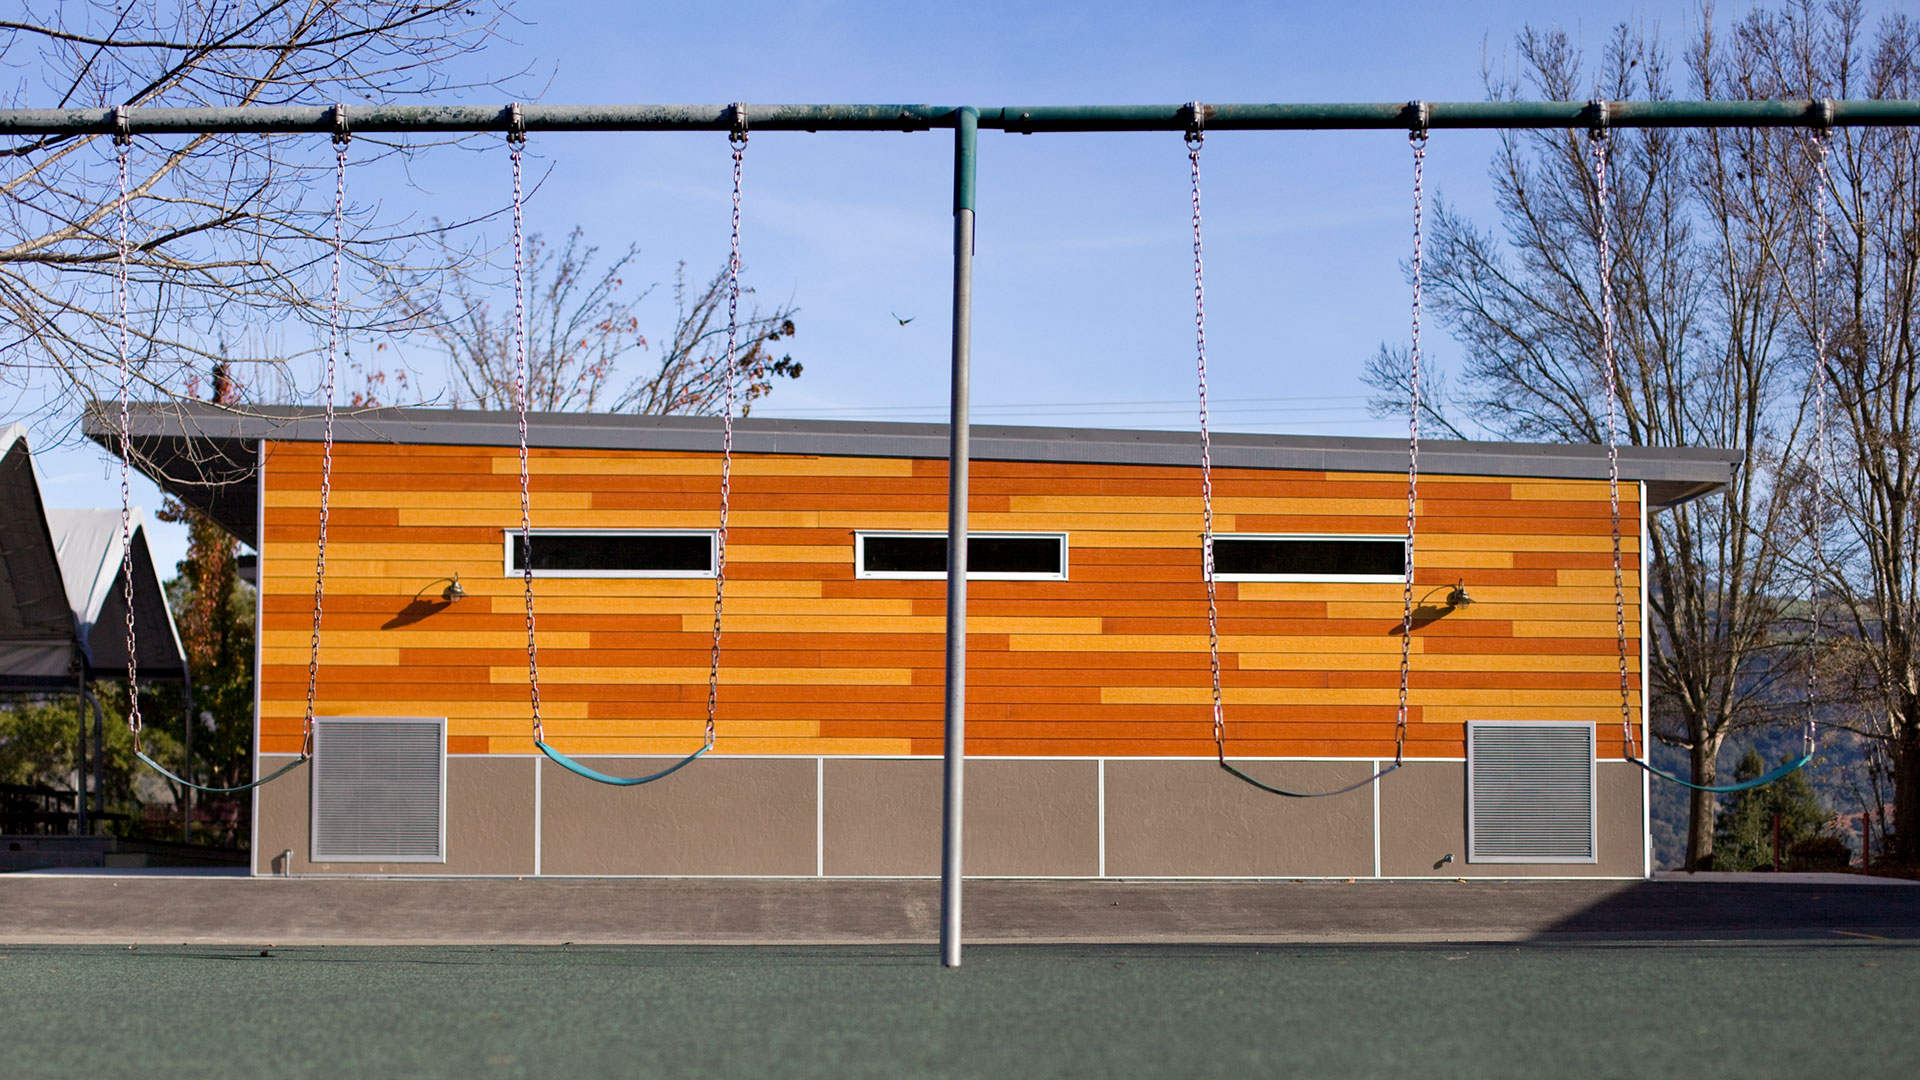 New multi-use room exterior, with wooden panel walls over gray wainscot, with playground swings in foreground.